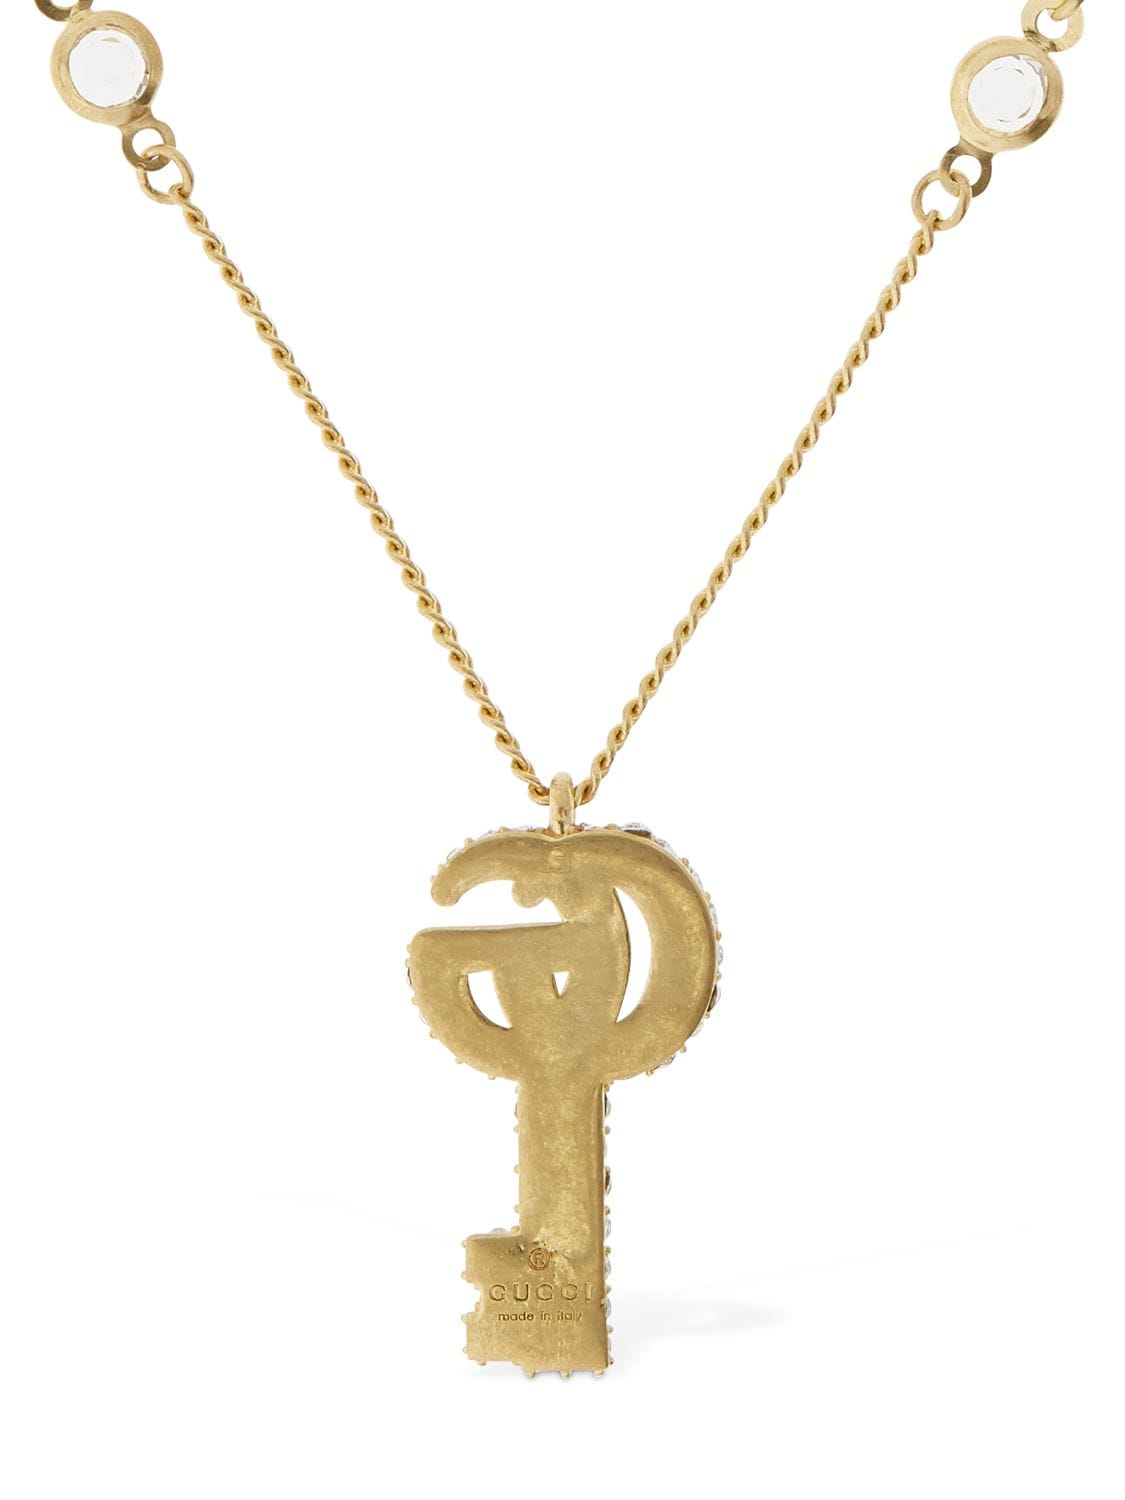 Double G key necklace with crystals